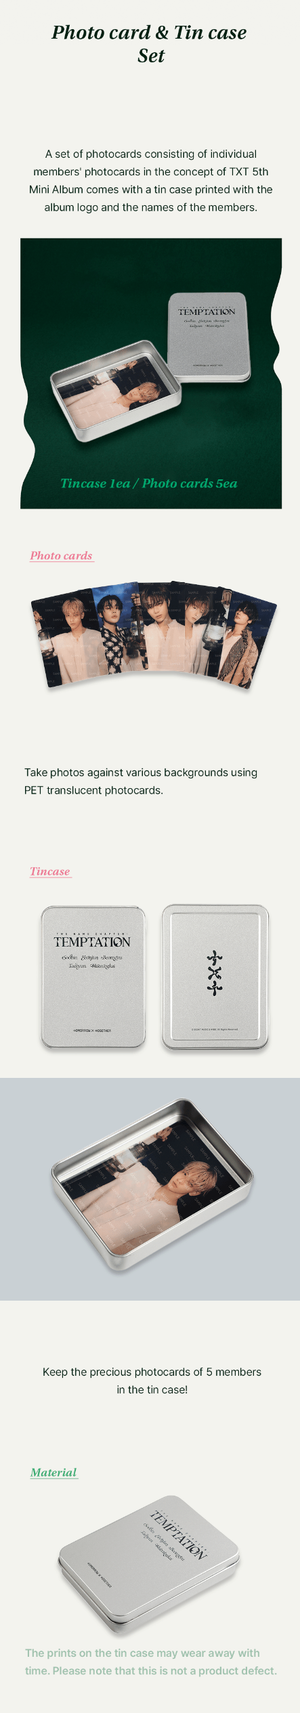 TXT - THE NAME CHAPTER TEMPTATION 5TH MINI ALBUM OFFICIAL MD - COKODIVE